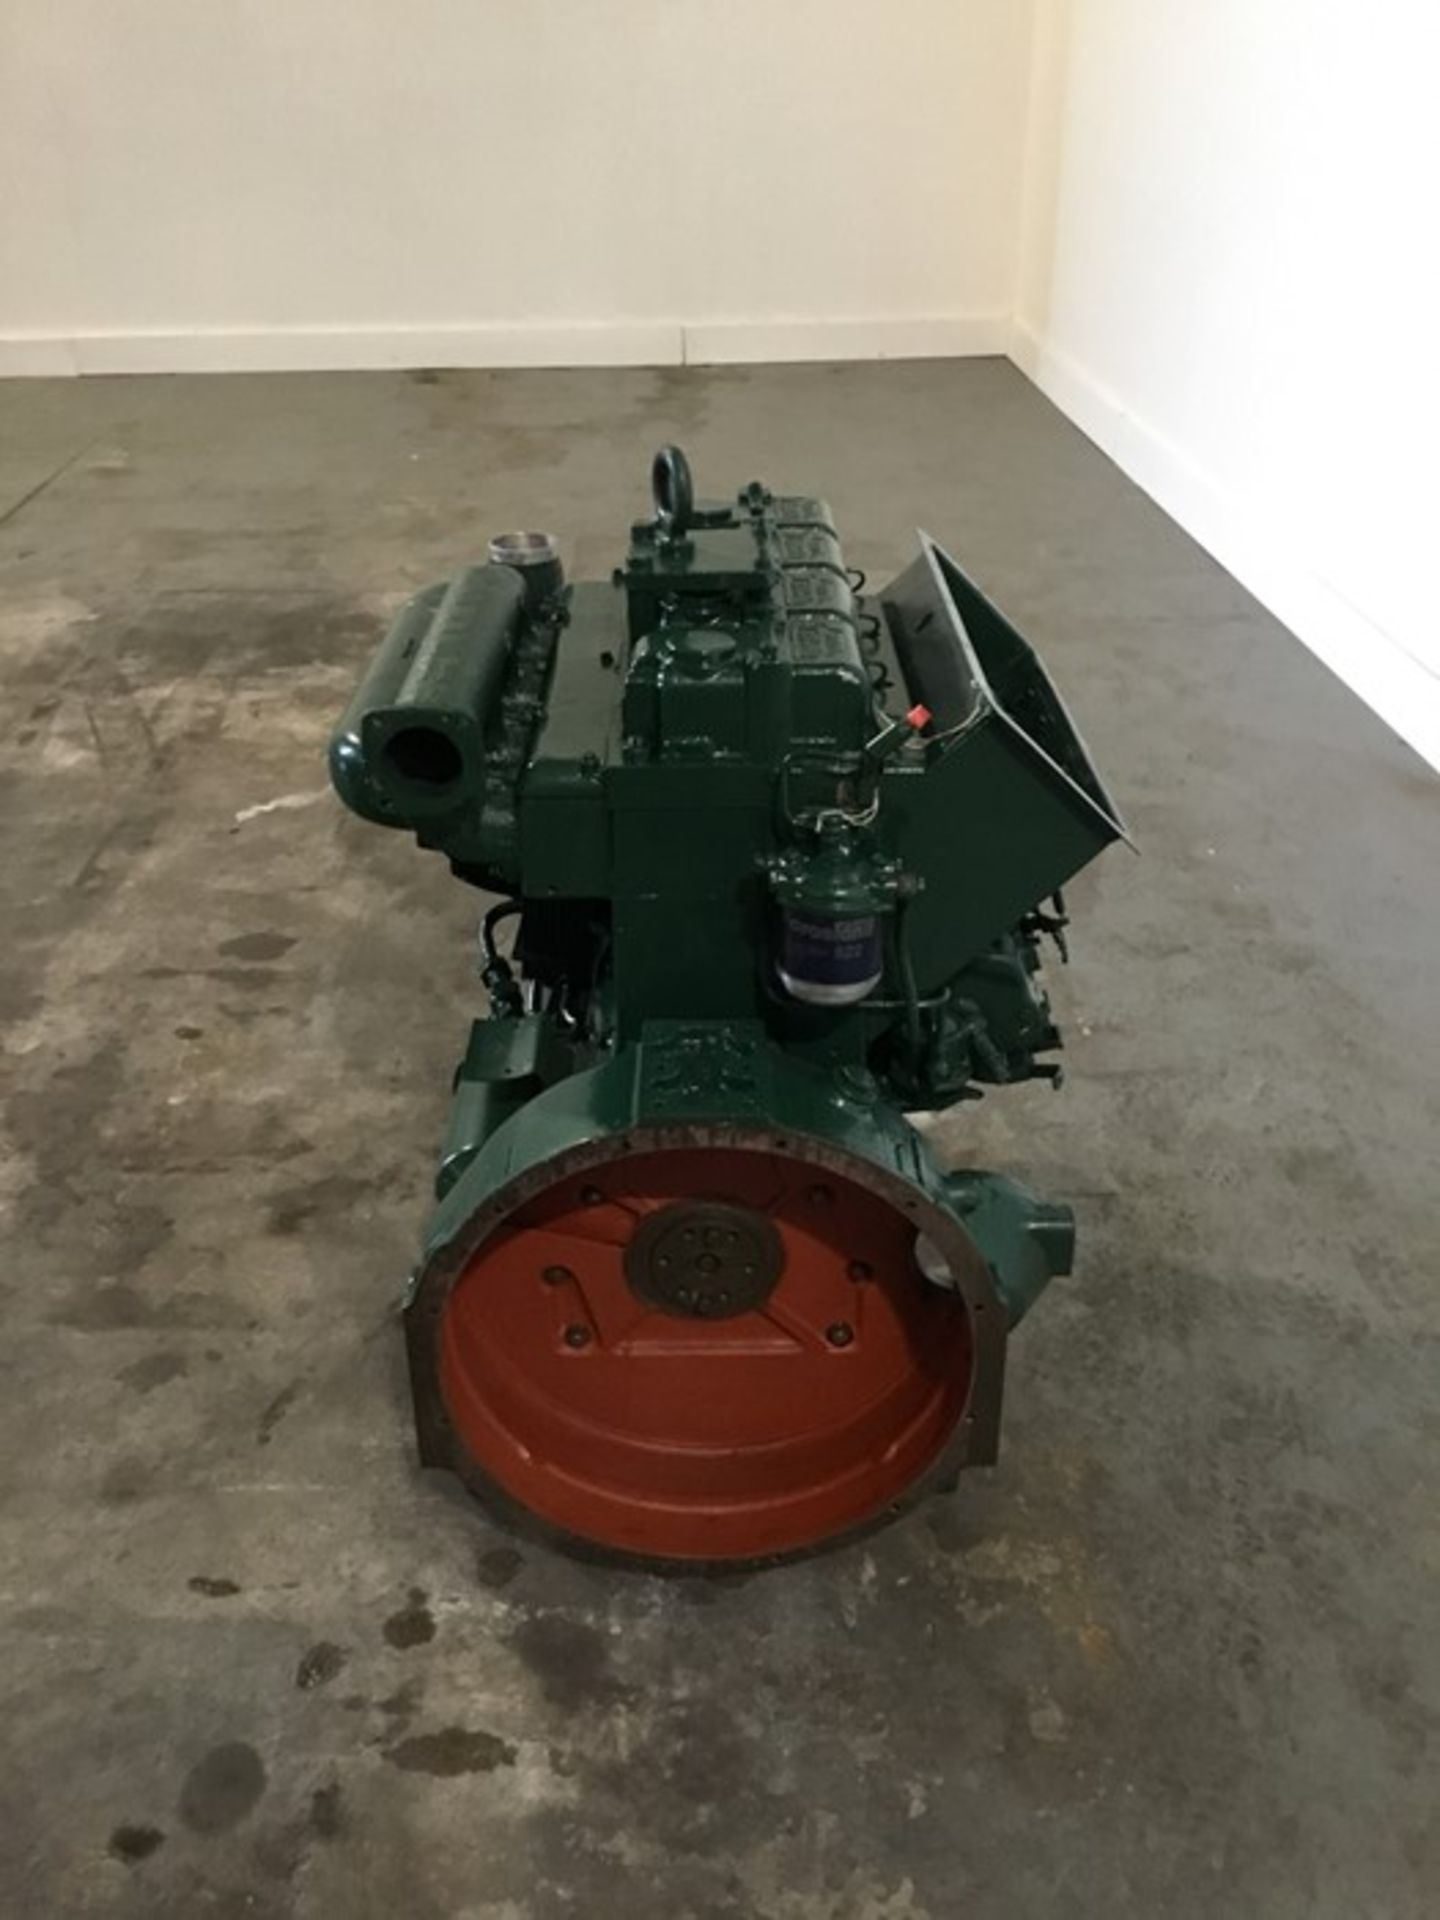 Lister 4cyl Diesel Engine: Lister 4cyl non turbo low hours - Image 10 of 18